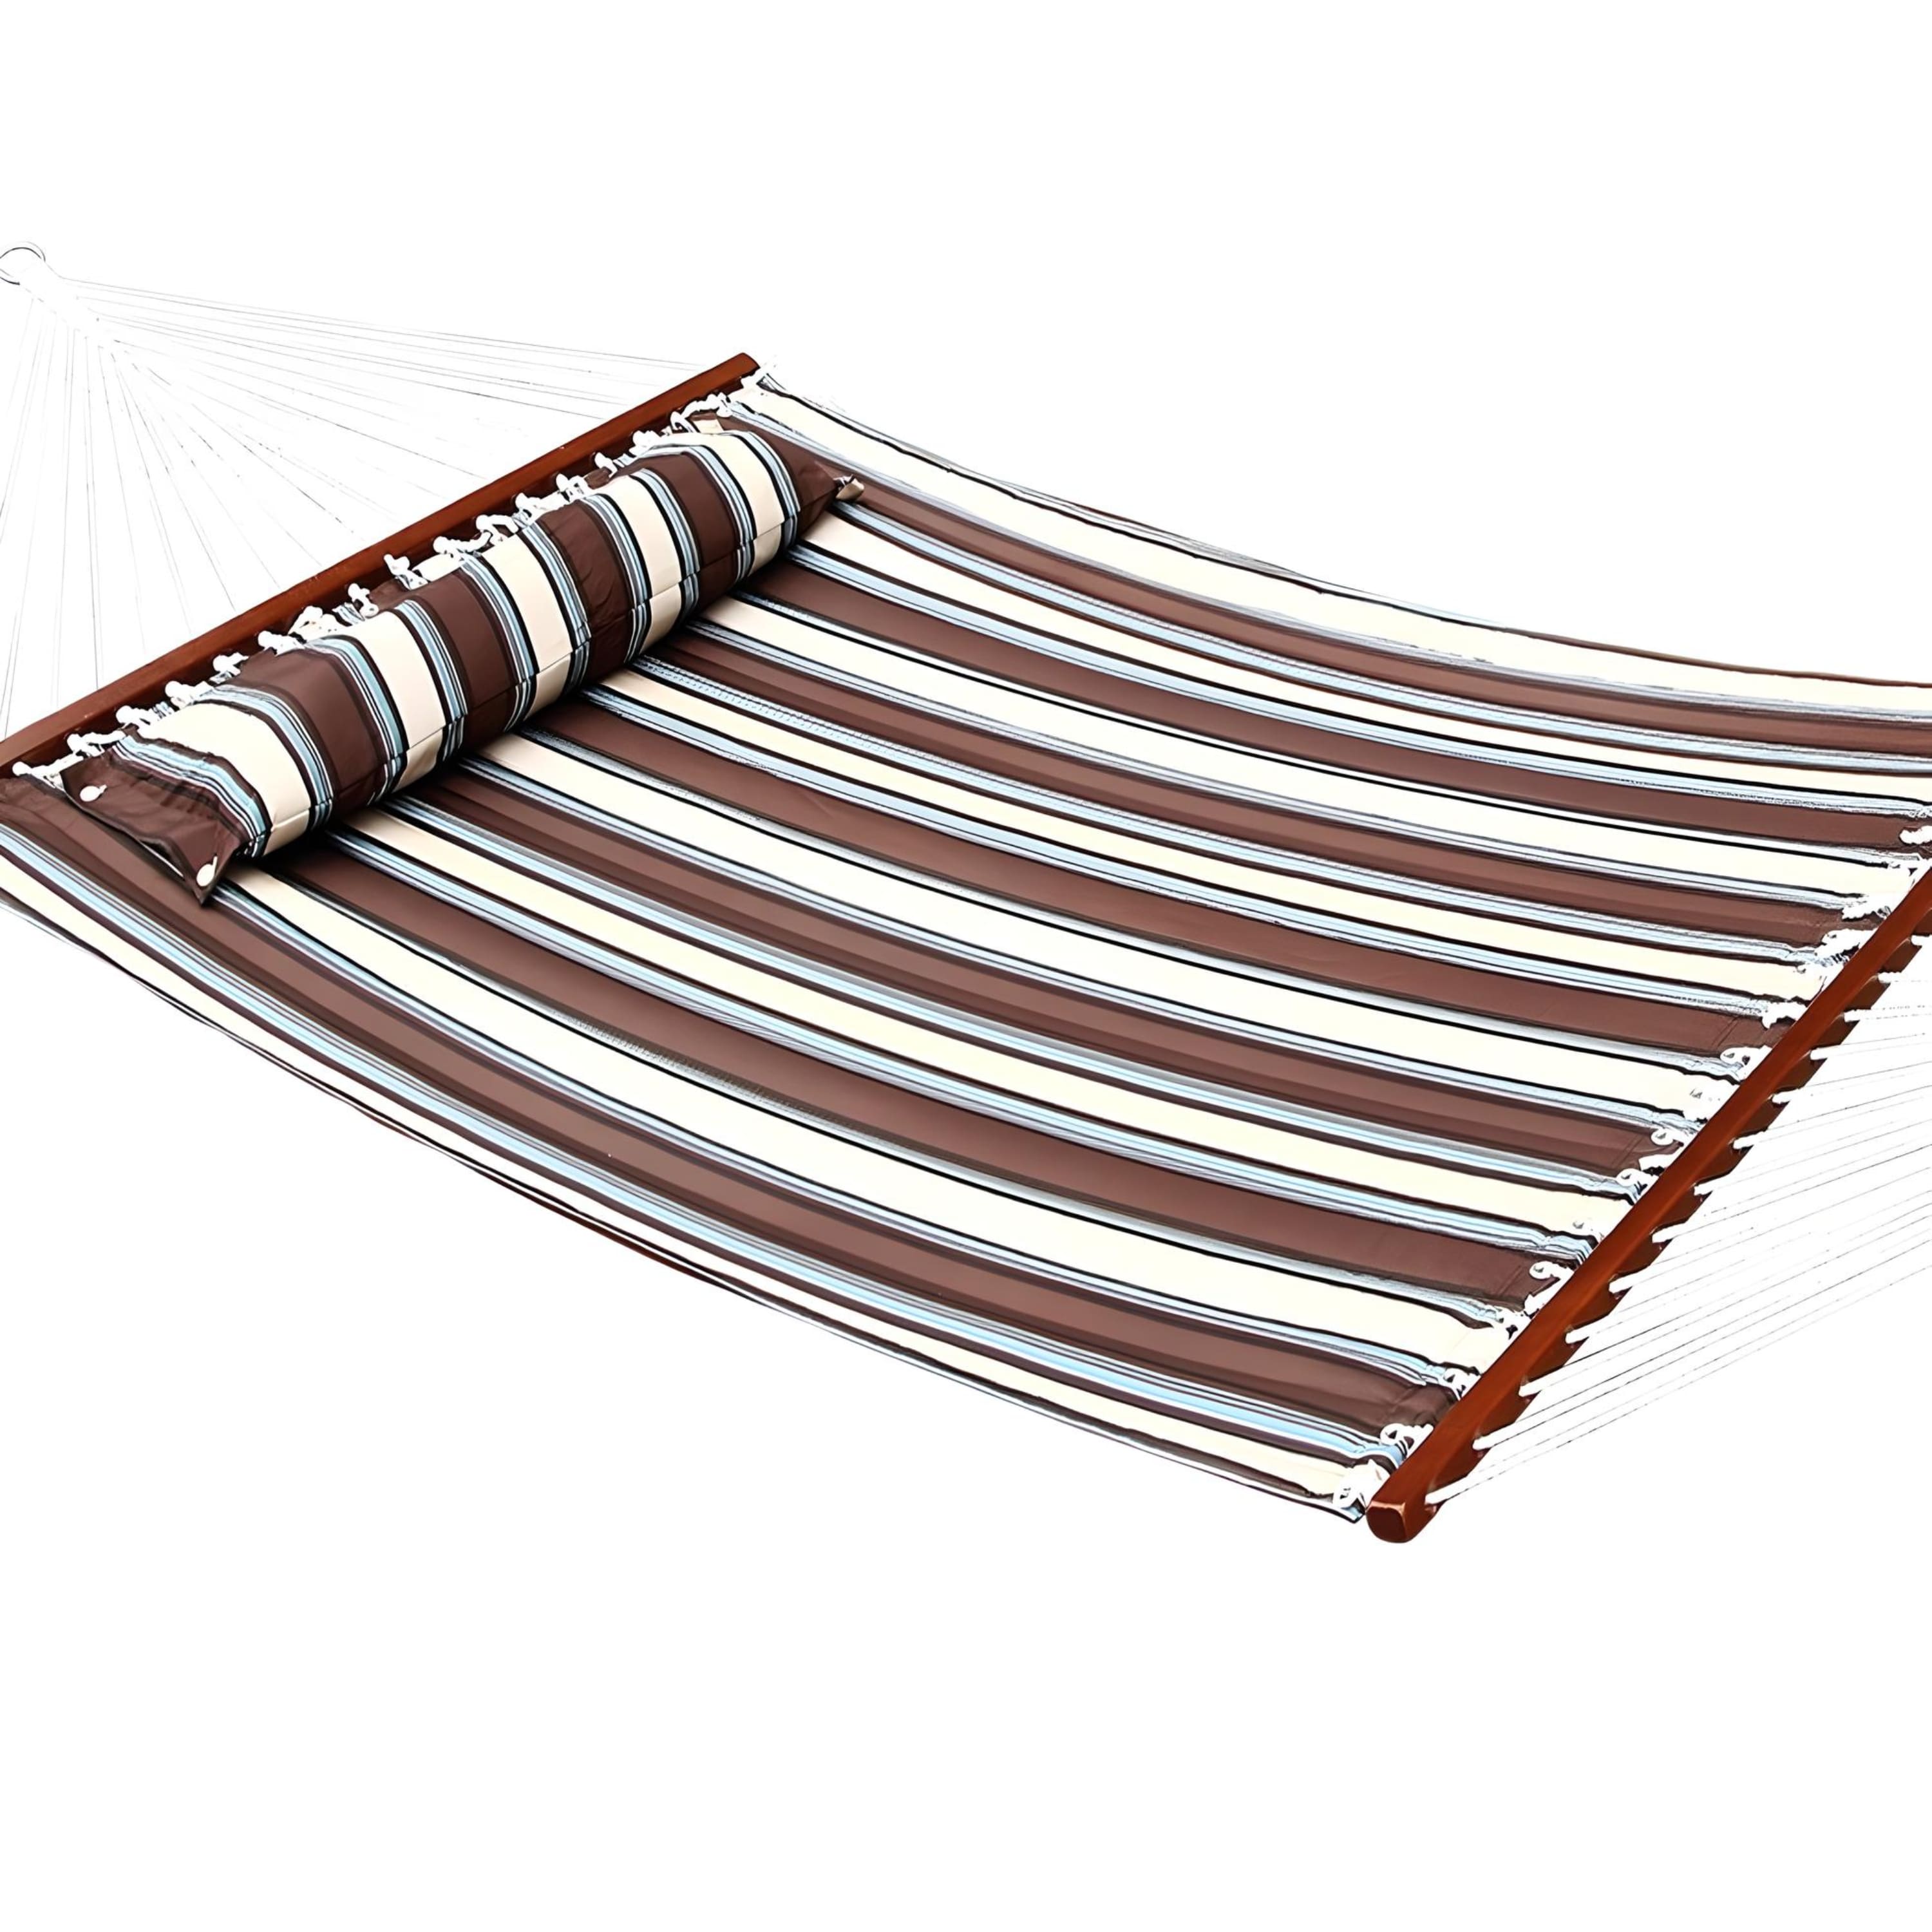 2-person-outdoor-hammock-with-pillow